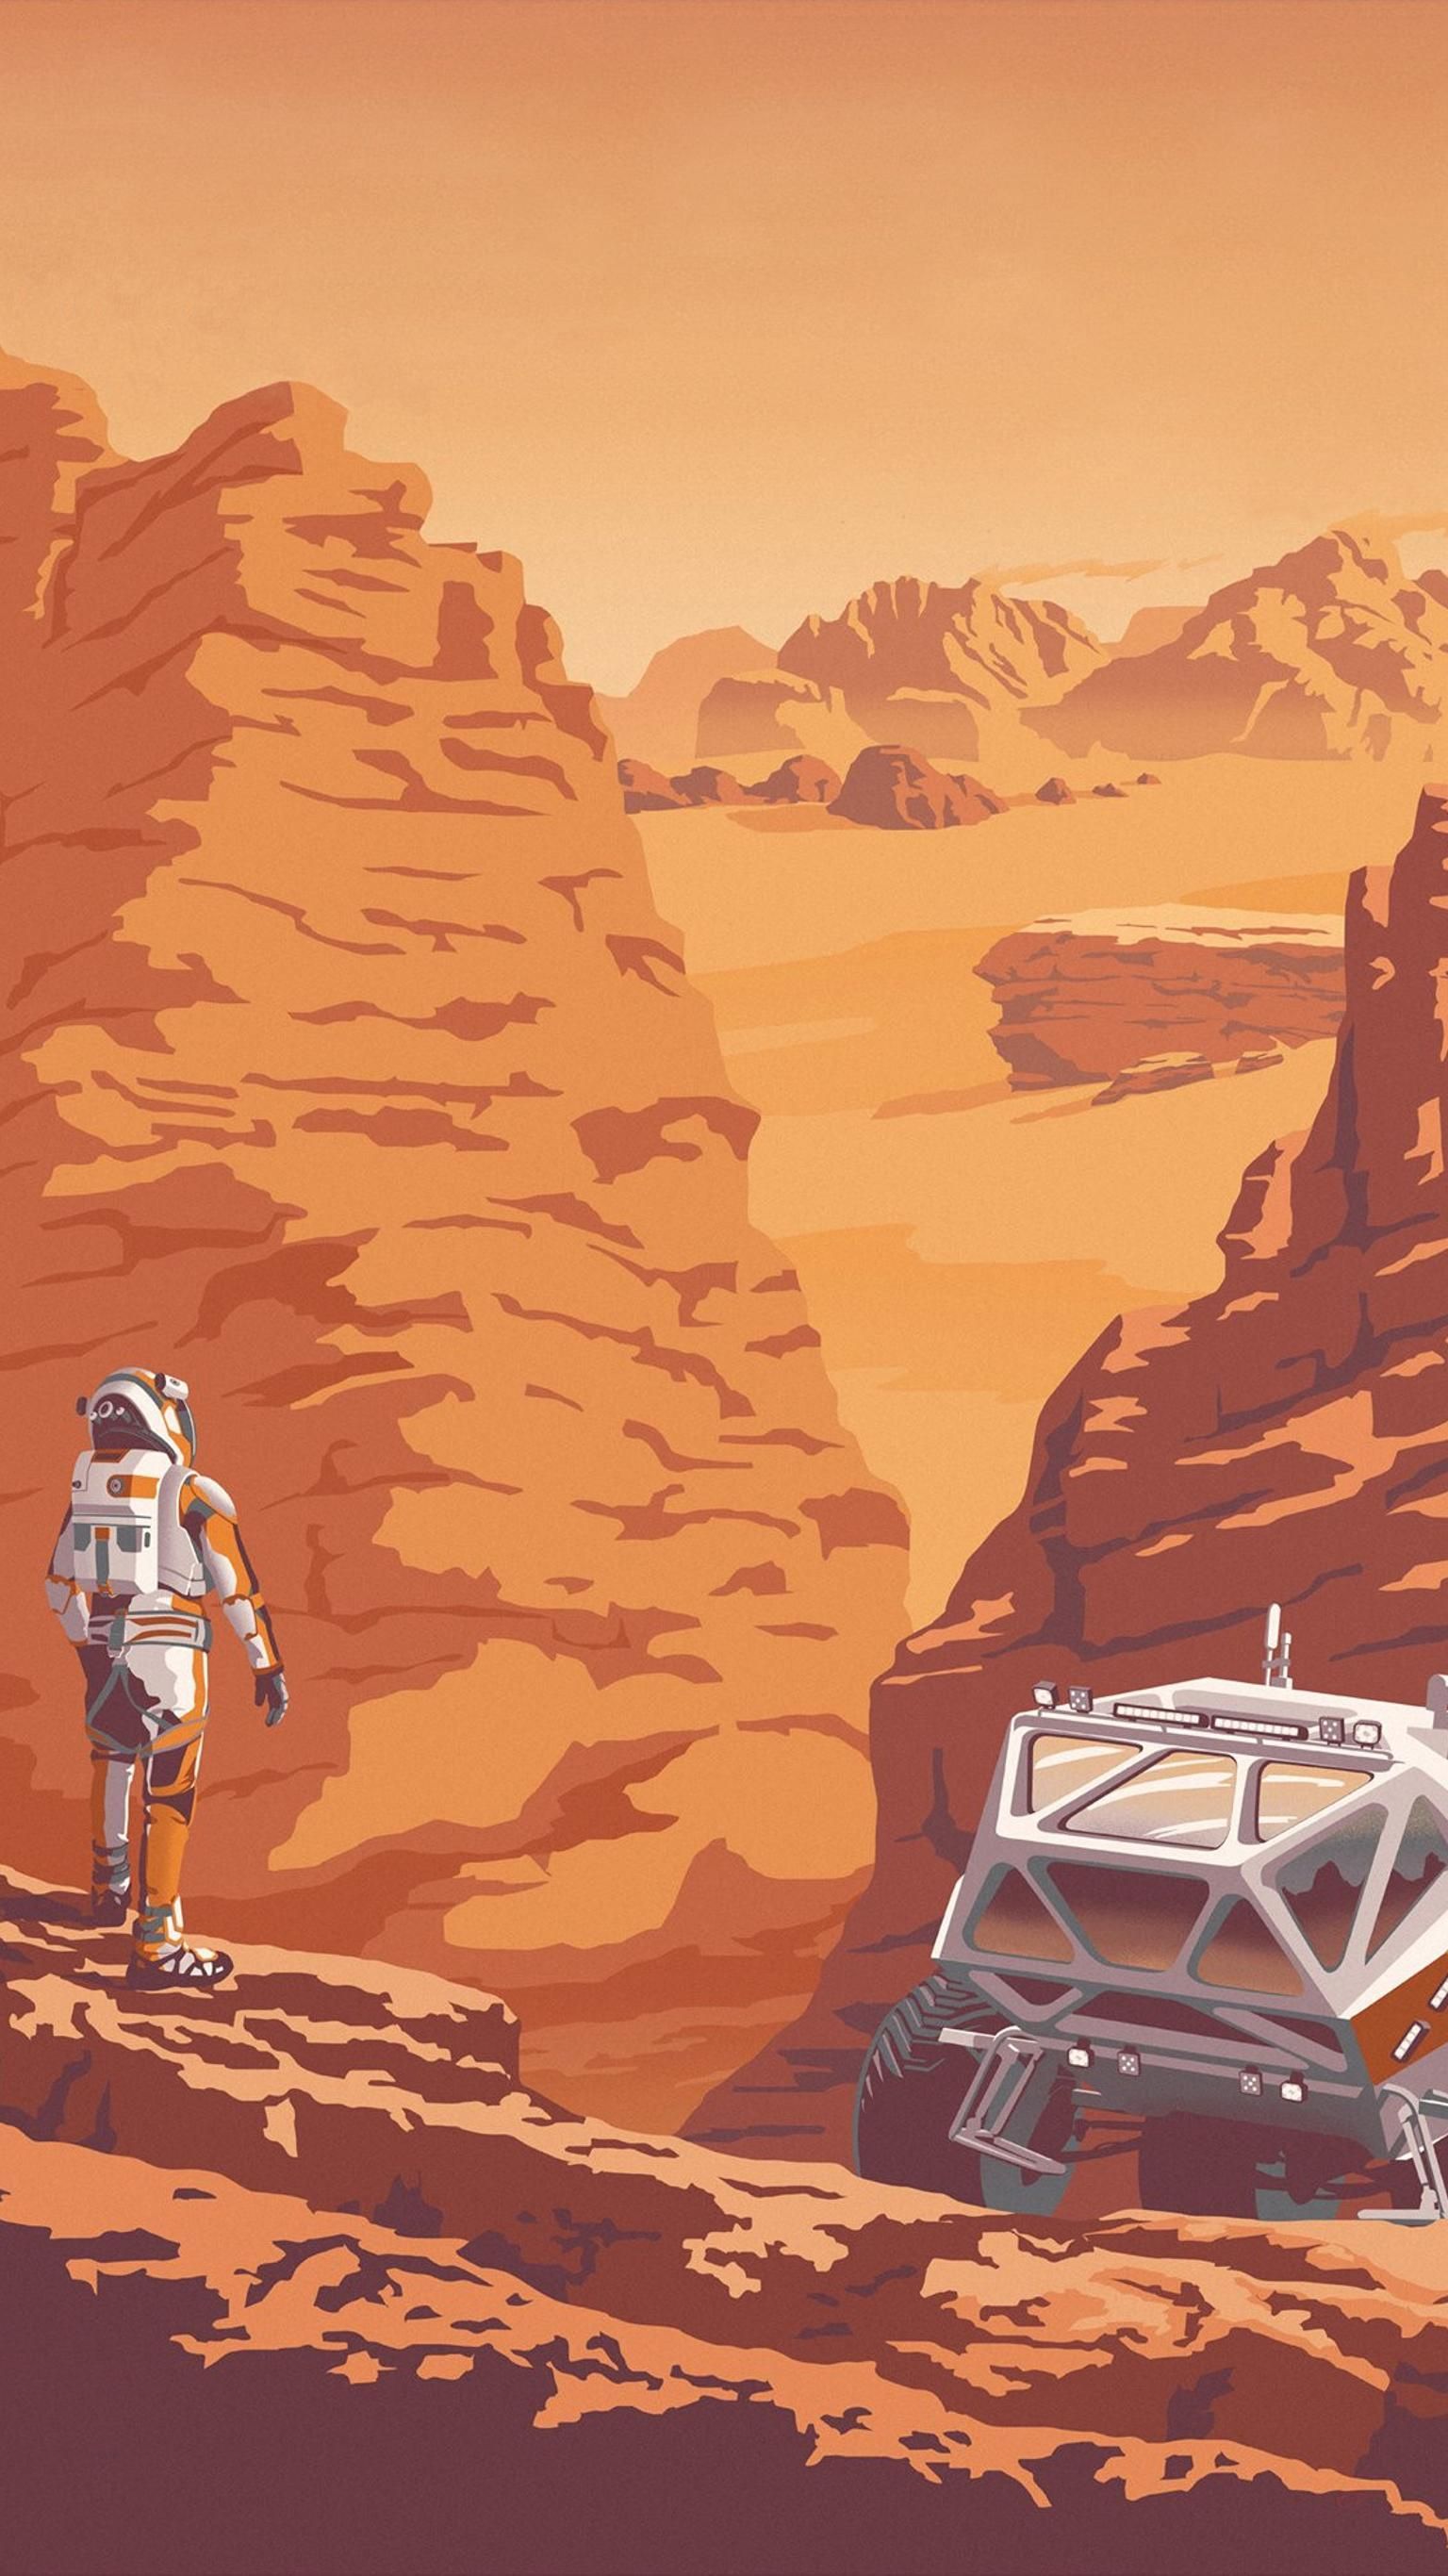 The Martian (2015) Phone Wallpaper. Moviemania. Space travel art, Space travel posters, Retro poster